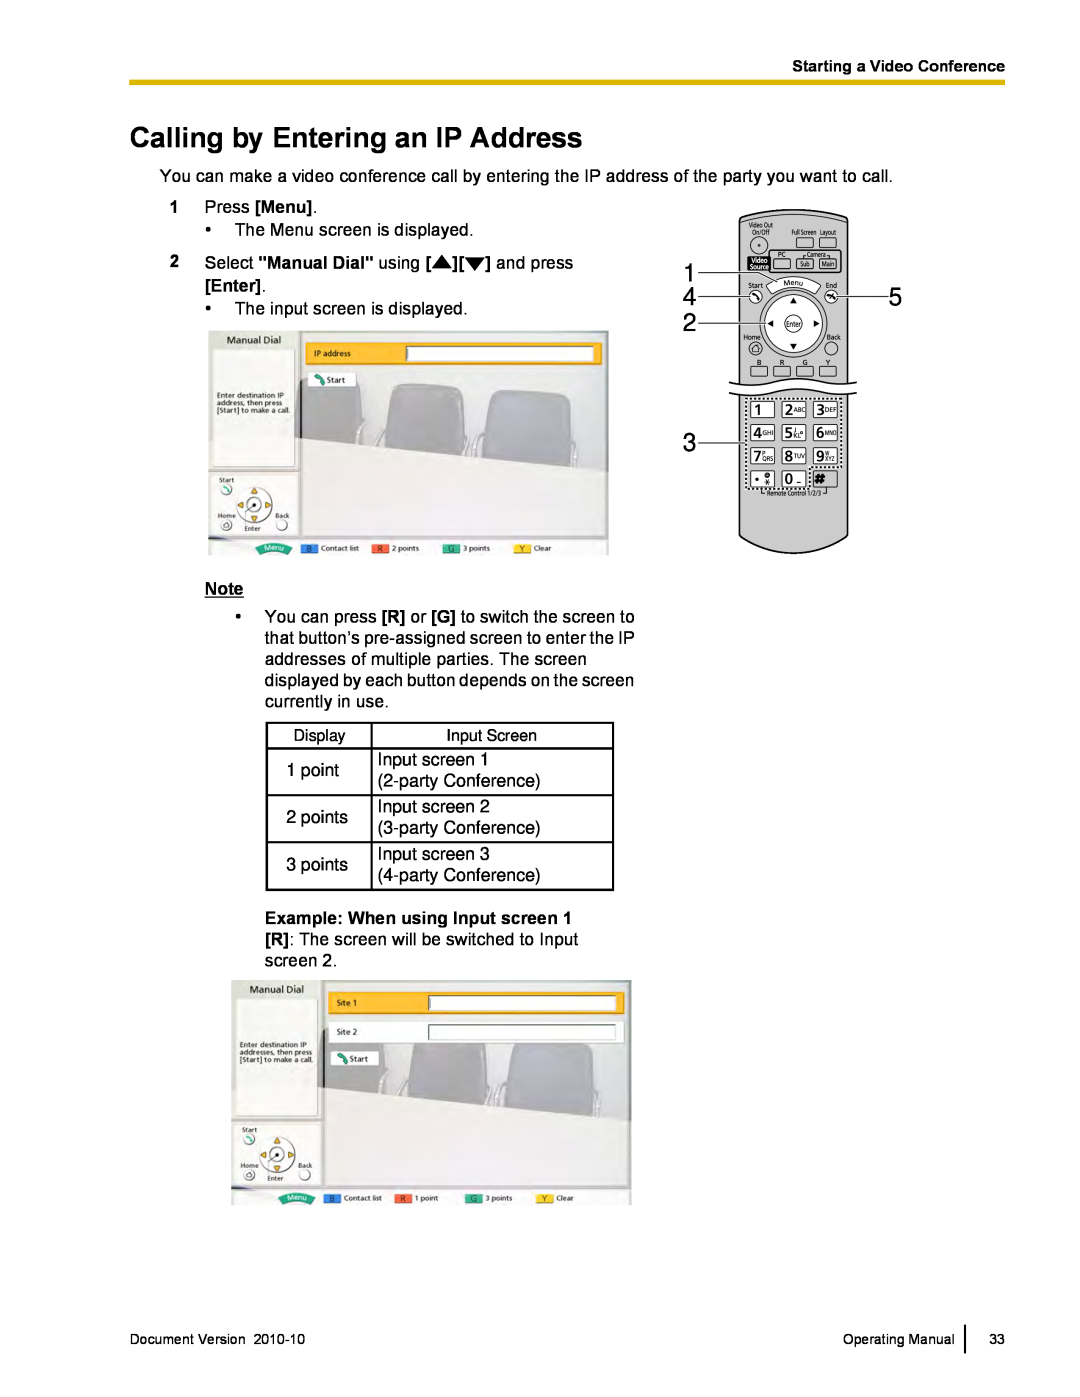 Panasonic KX-VC500 manual Calling by Entering an IP Address, 1 45 3, Example: When using Input screen 